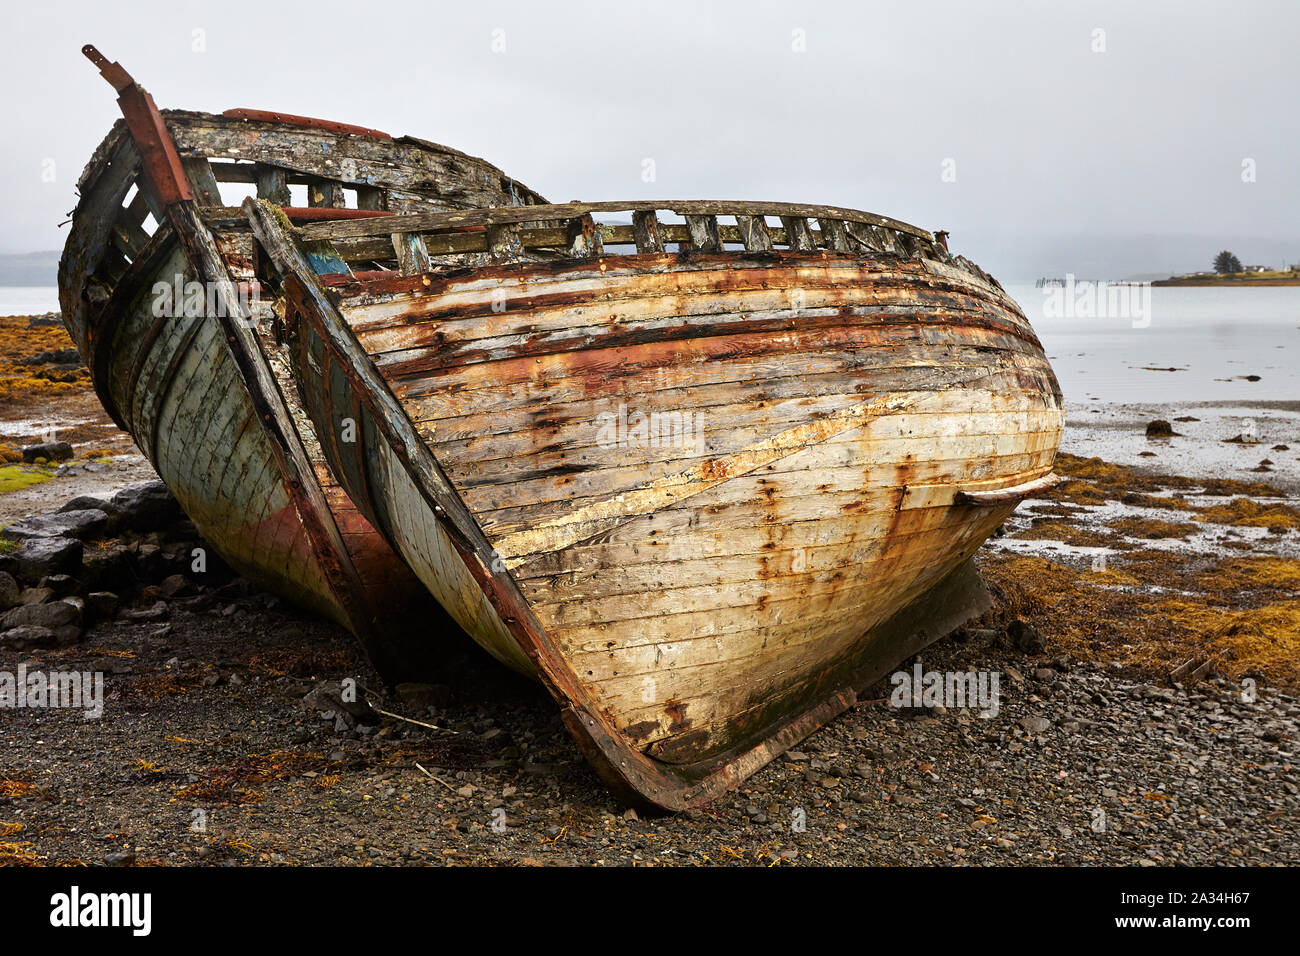 Abandoned boats on a beach near Salen on the Isle of Mull in Scotland, UK Stock Photo